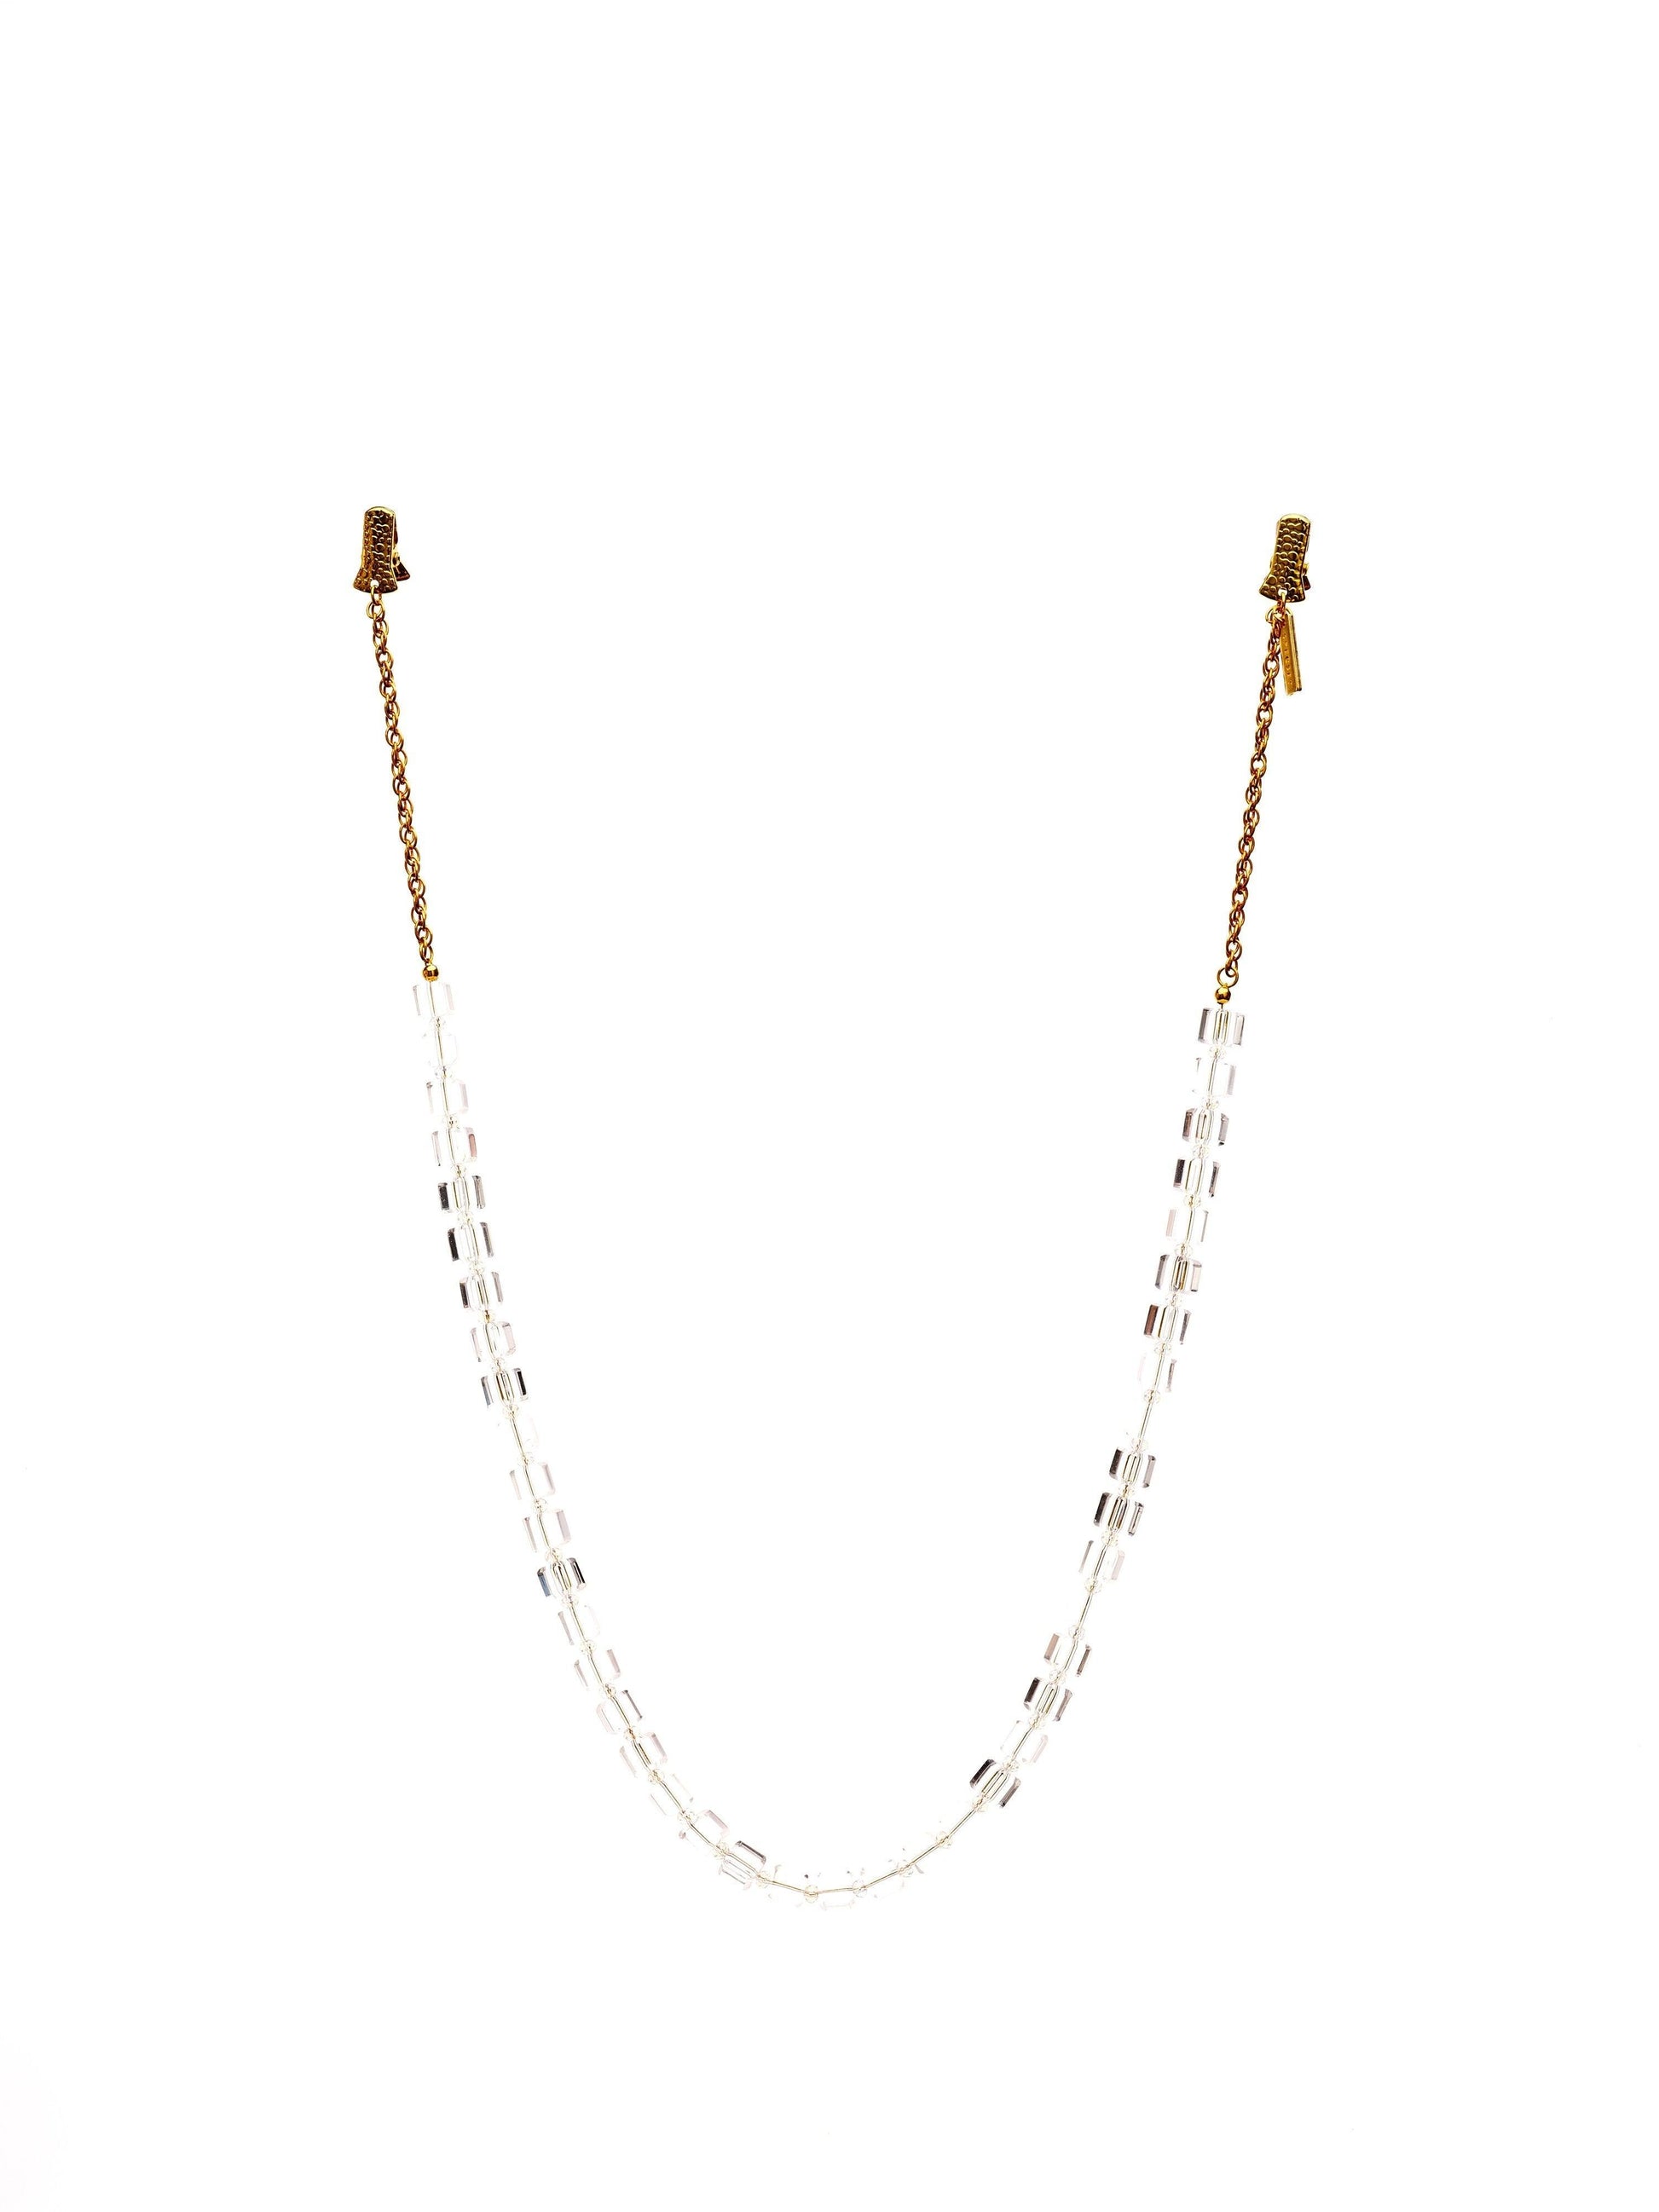 CRYSTAL CLEAR - GOLD Eyewear Chain | SPECSET